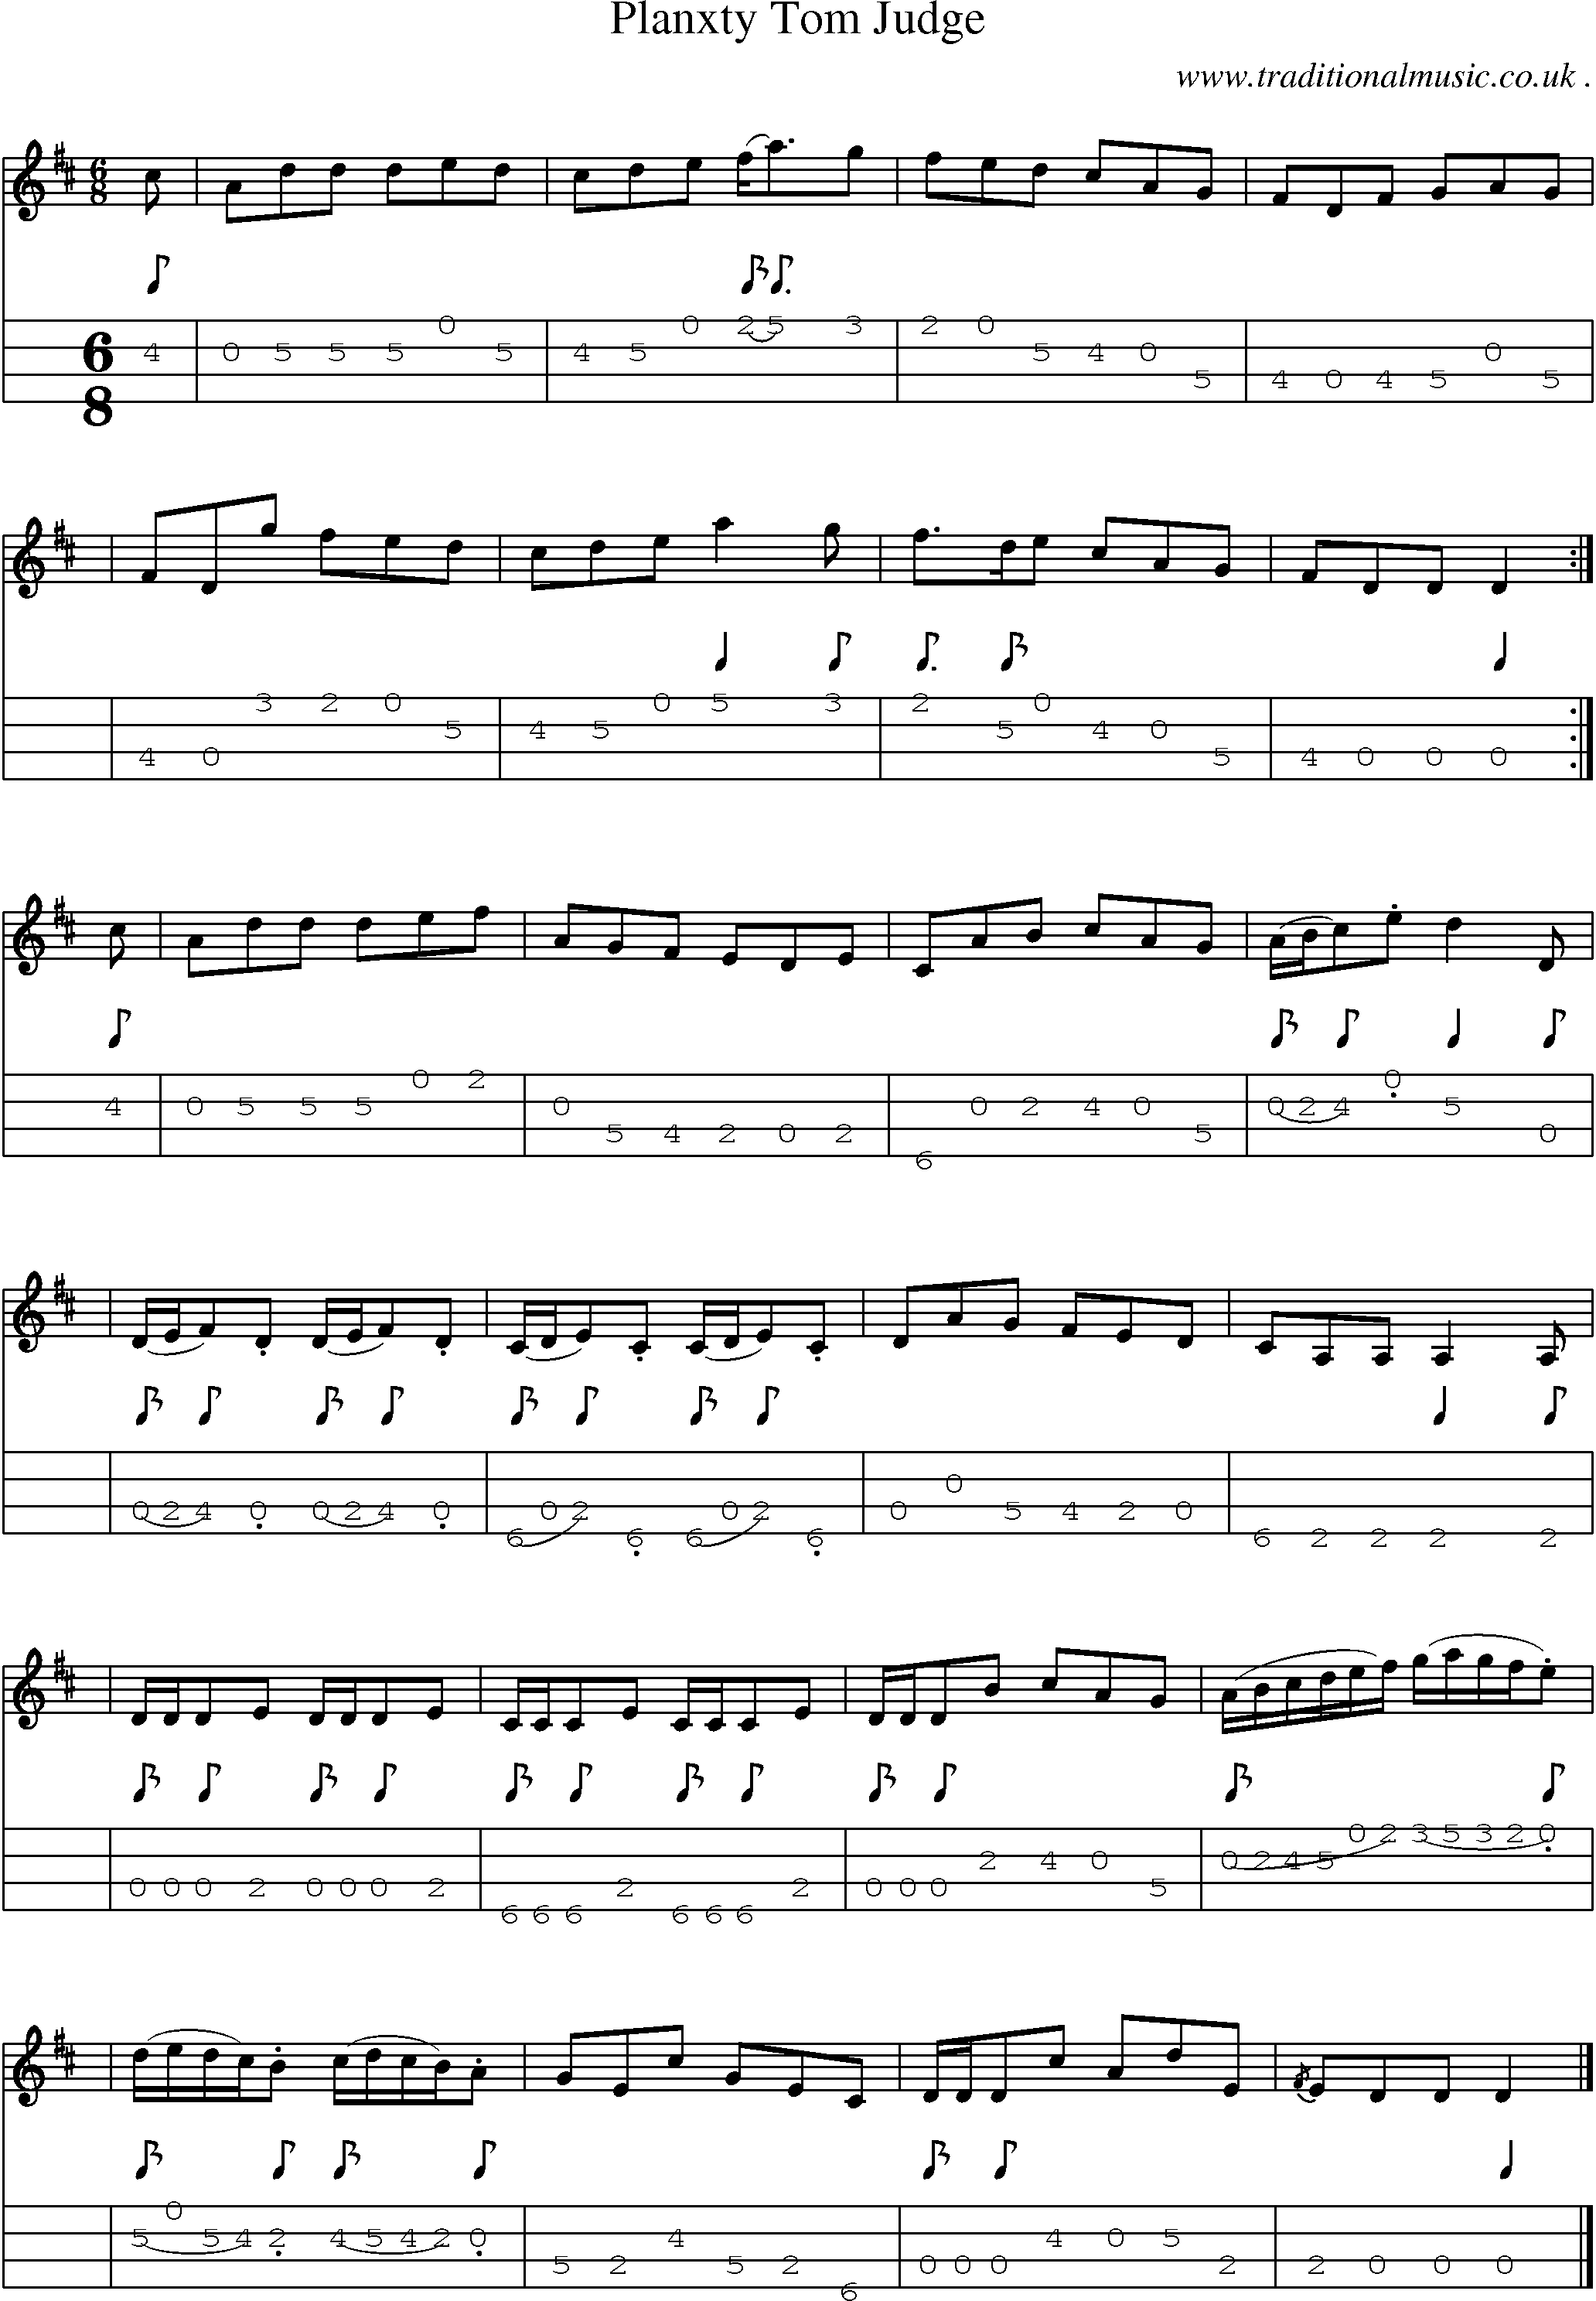 Sheet-music  score, Chords and Mandolin Tabs for Planxty Tom Judge